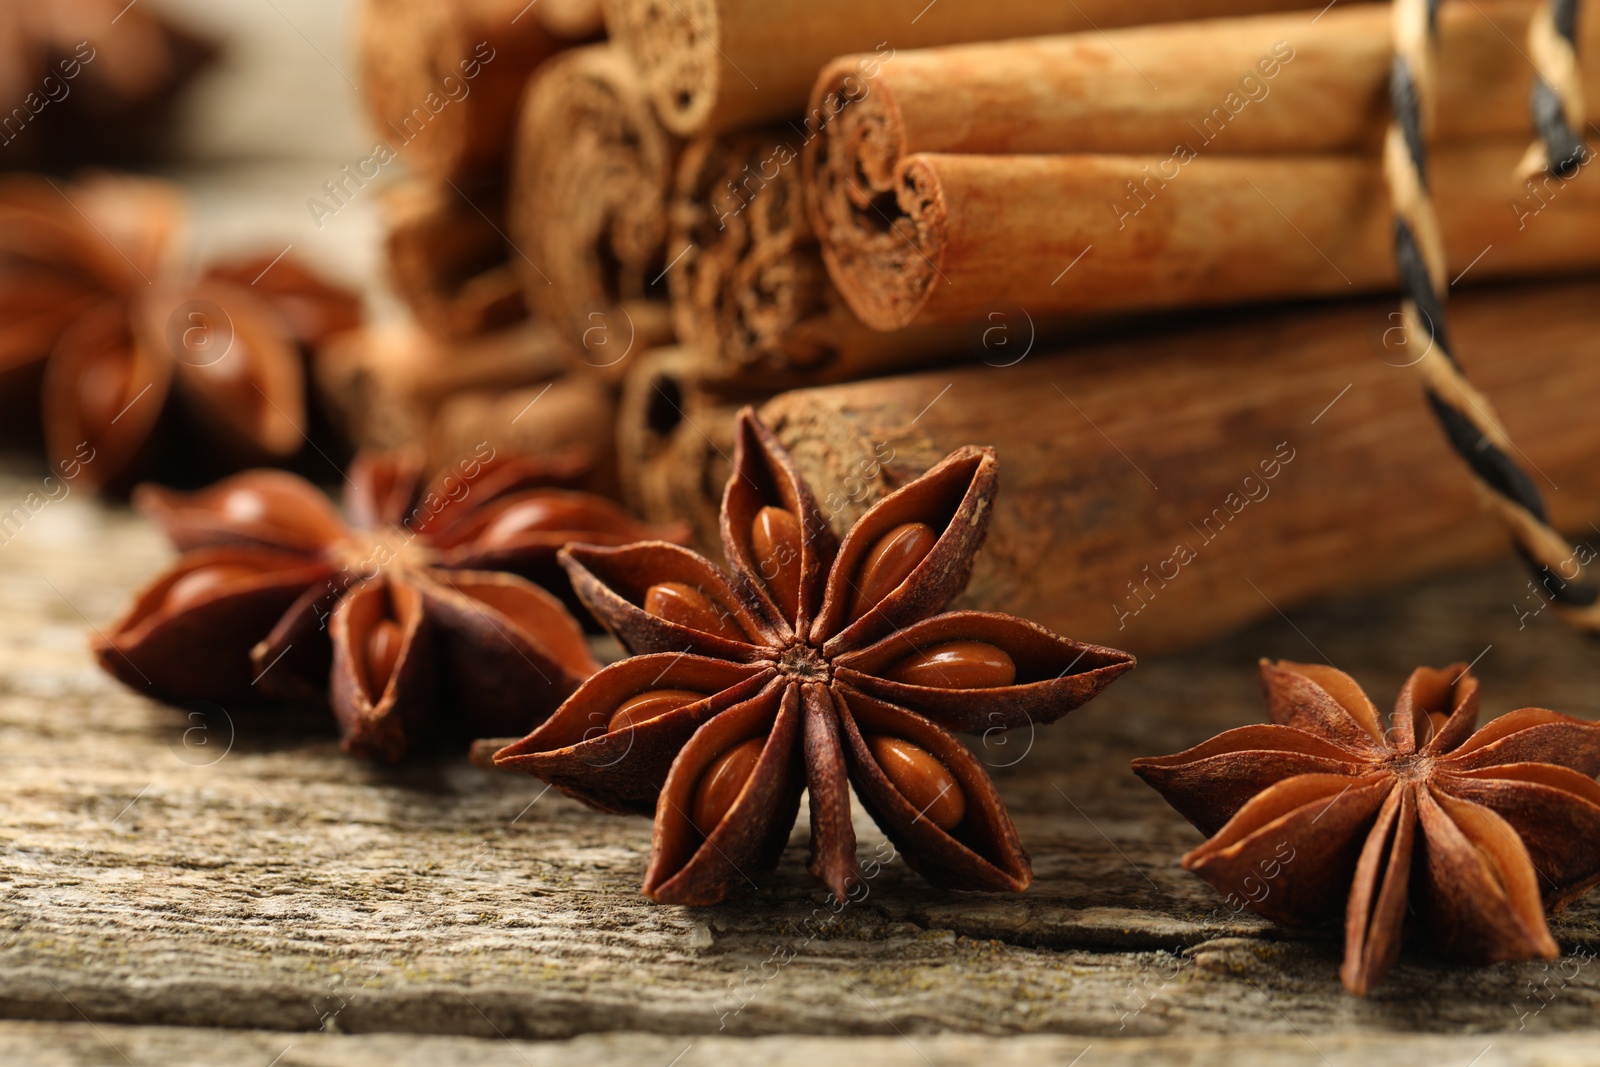 Photo of Cinnamon sticks and star anise on wooden table, closeup